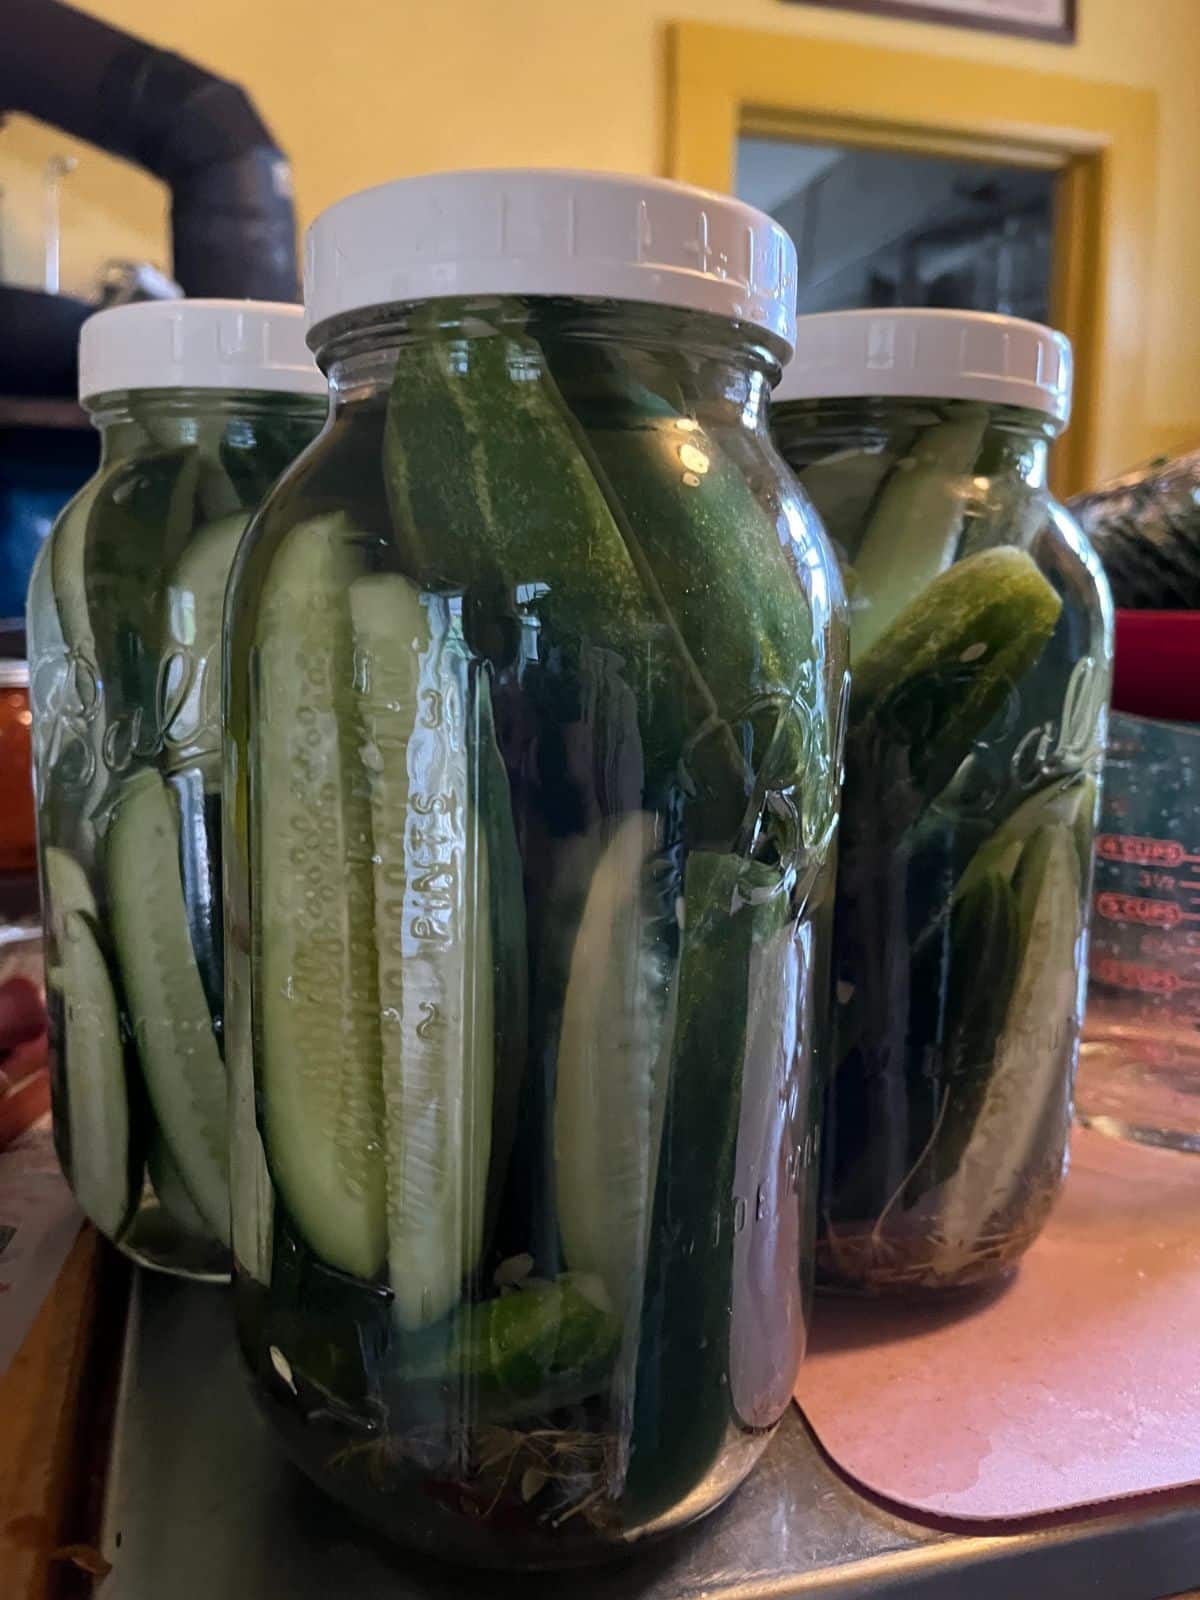 Large half-gallon jars filled with refrigerator pickles